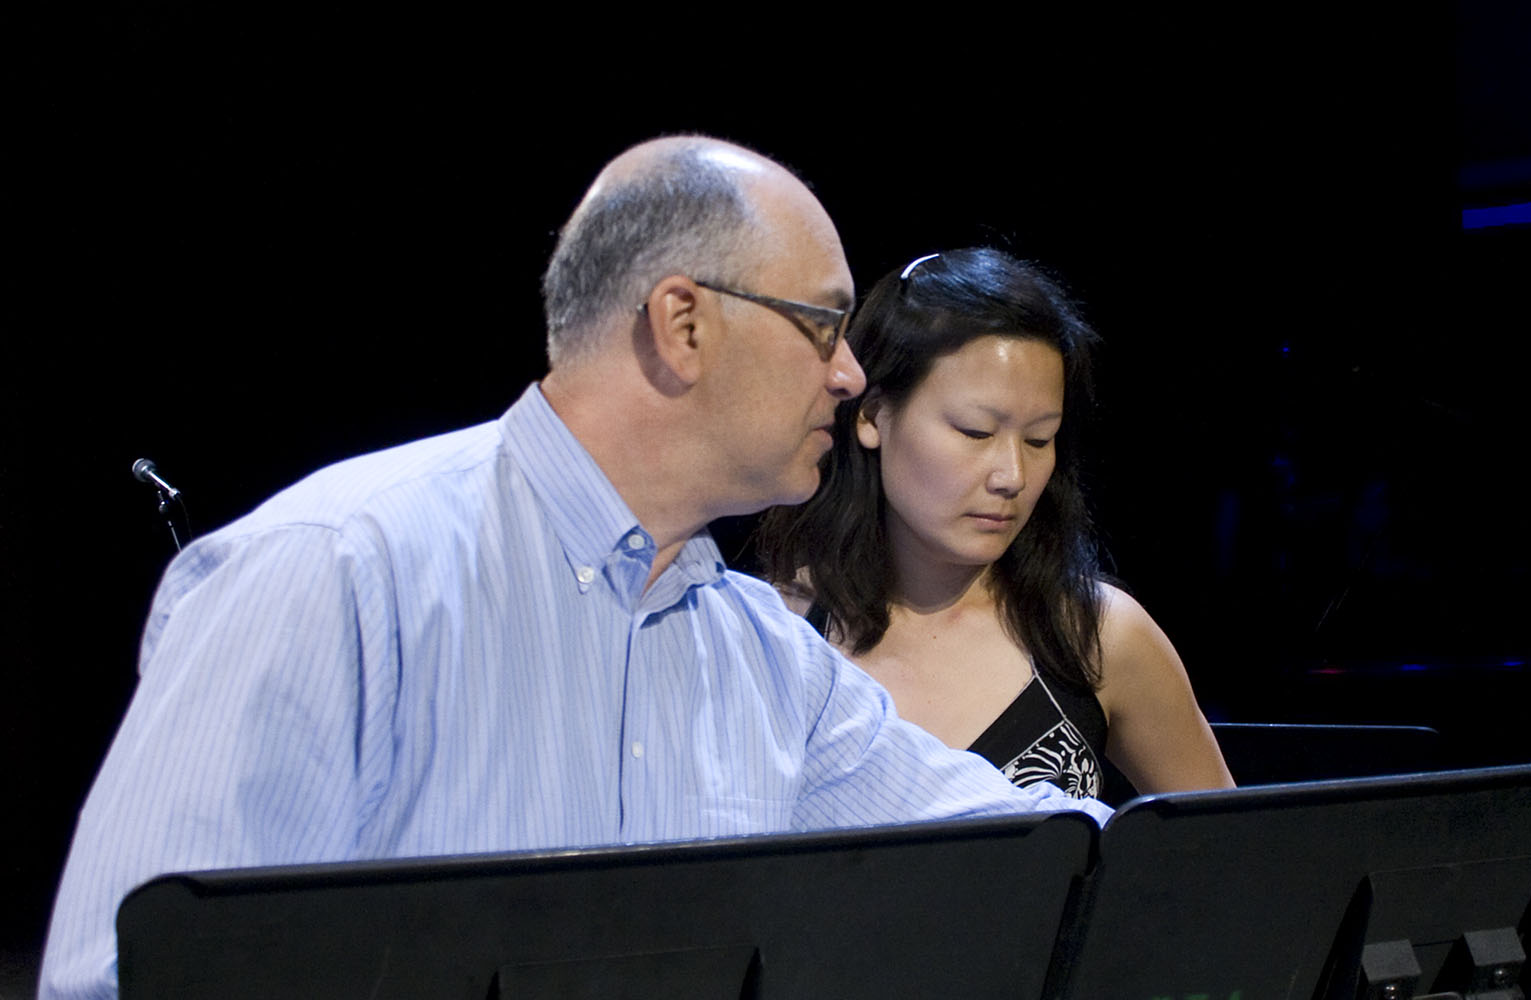 Composer David Felder Discussing His Piece Another Face With Violinist Lina Bahn  1